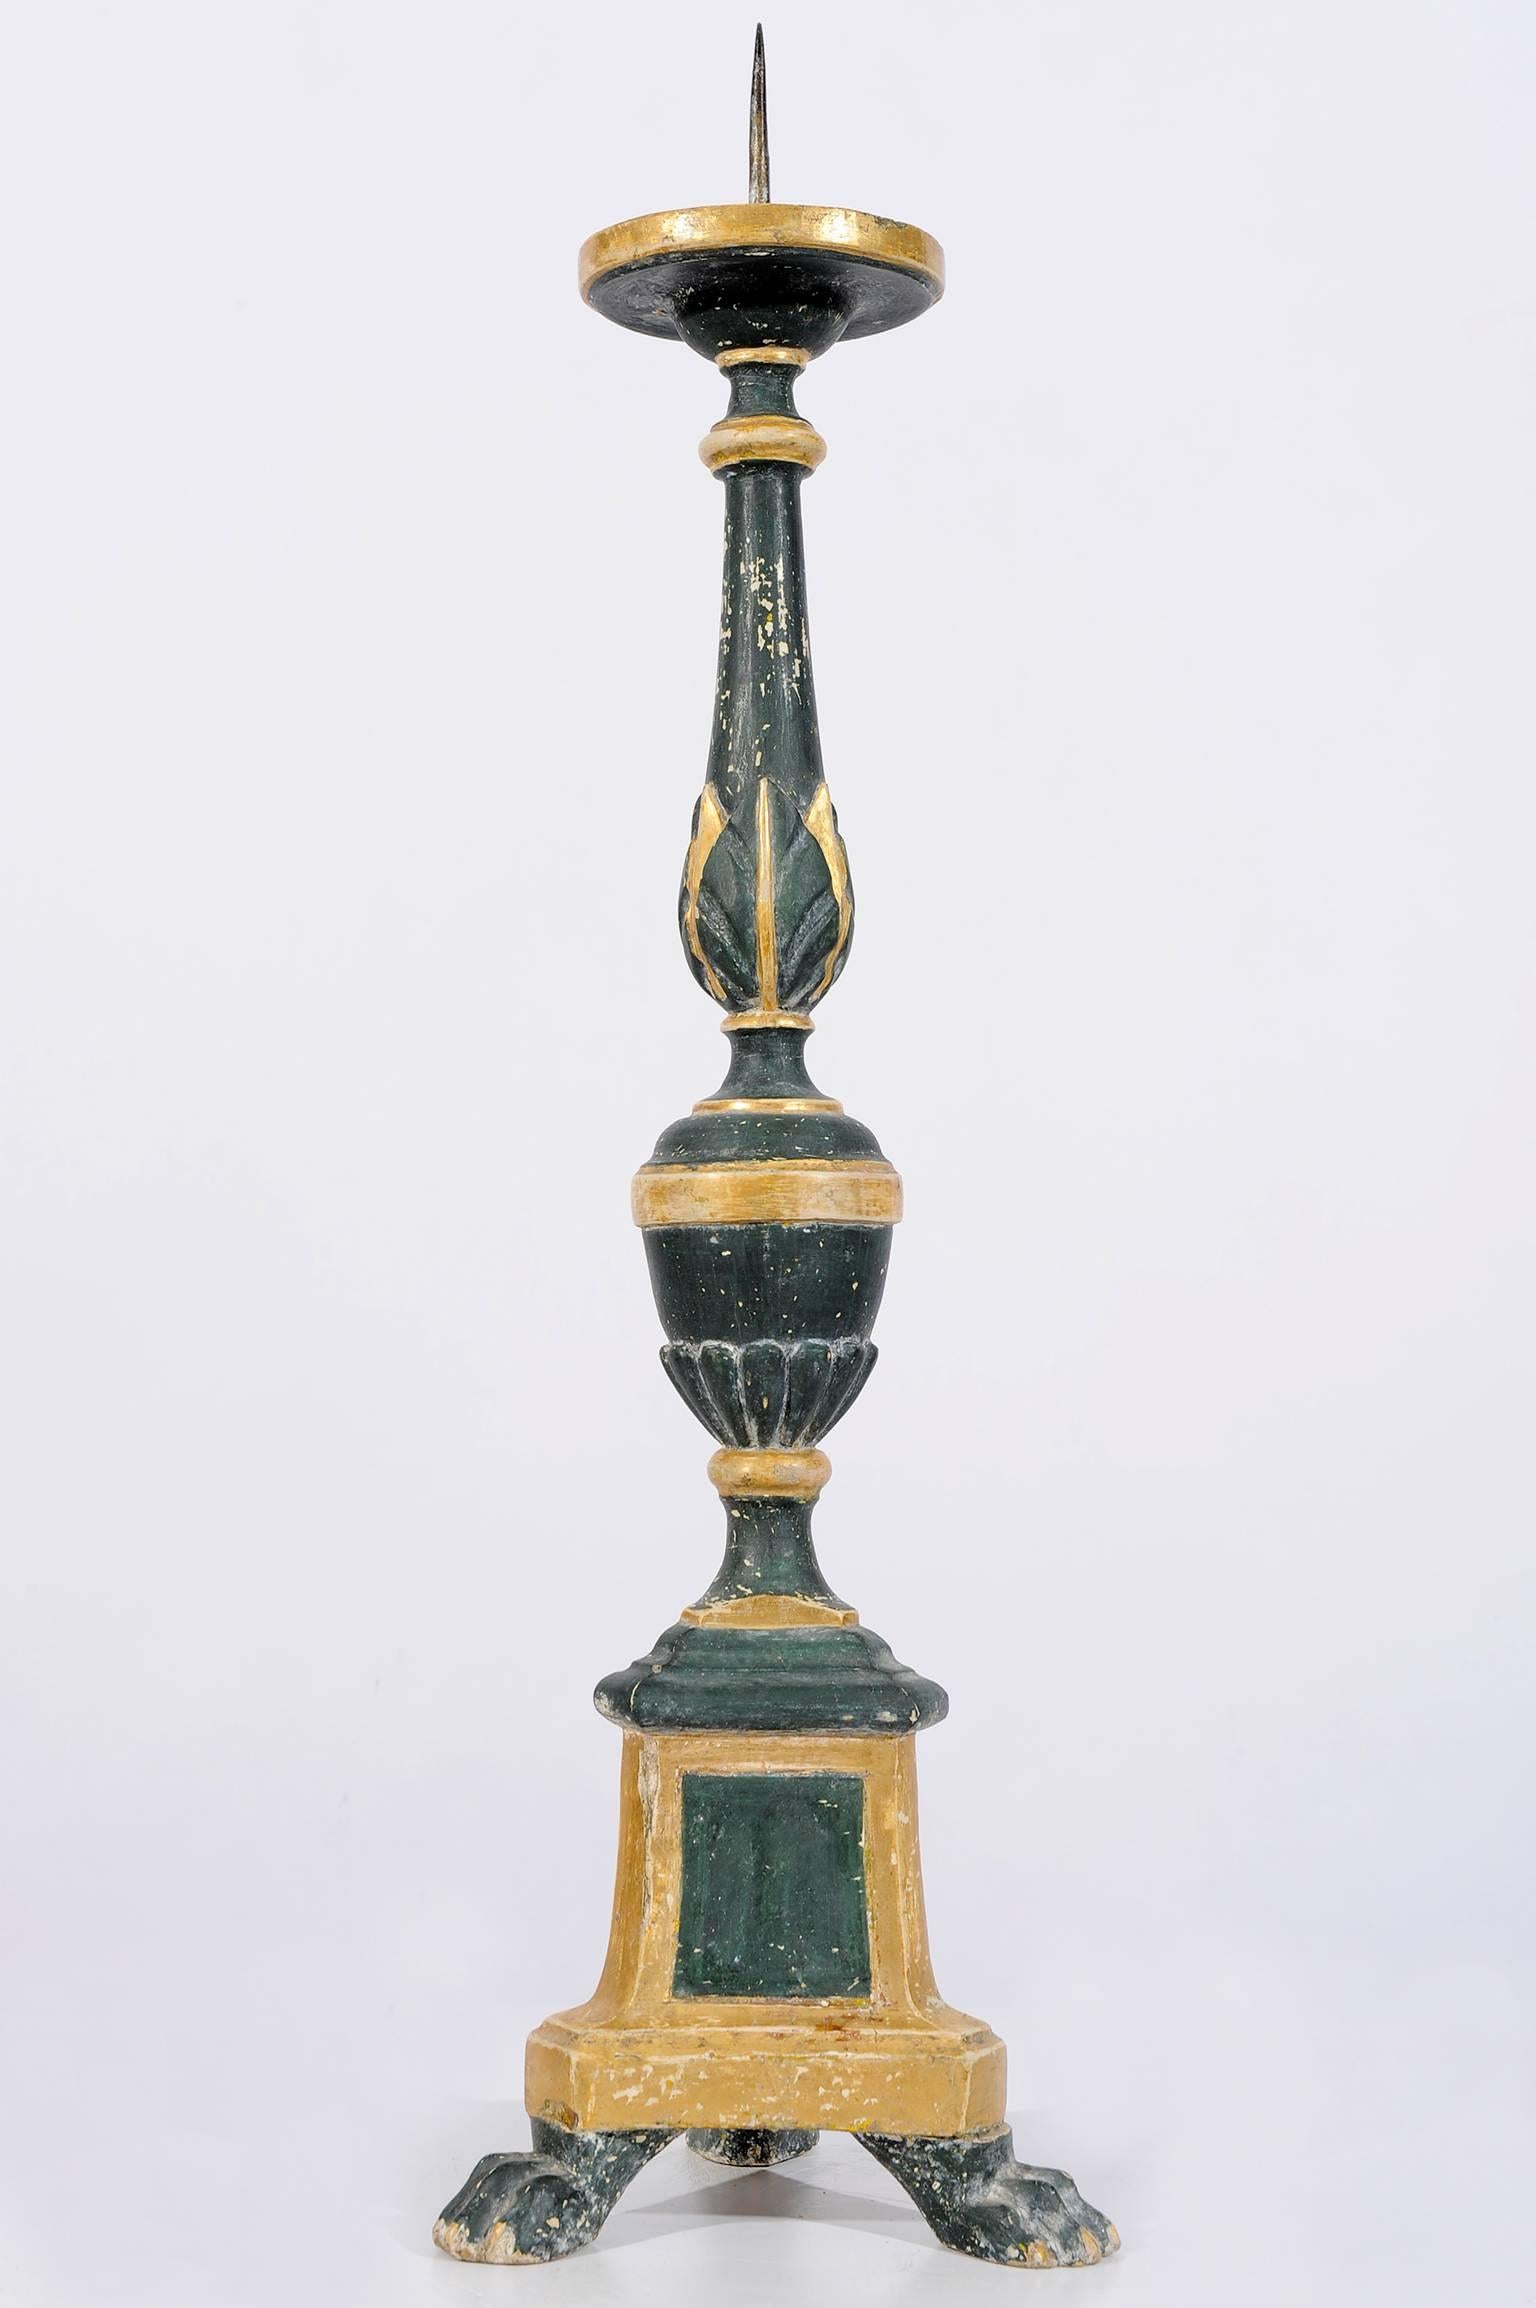 Rare set of 4 ancient tall Italian candlesticks, lacquered green wood -
It is possible also to buy a pair -
O/6196.